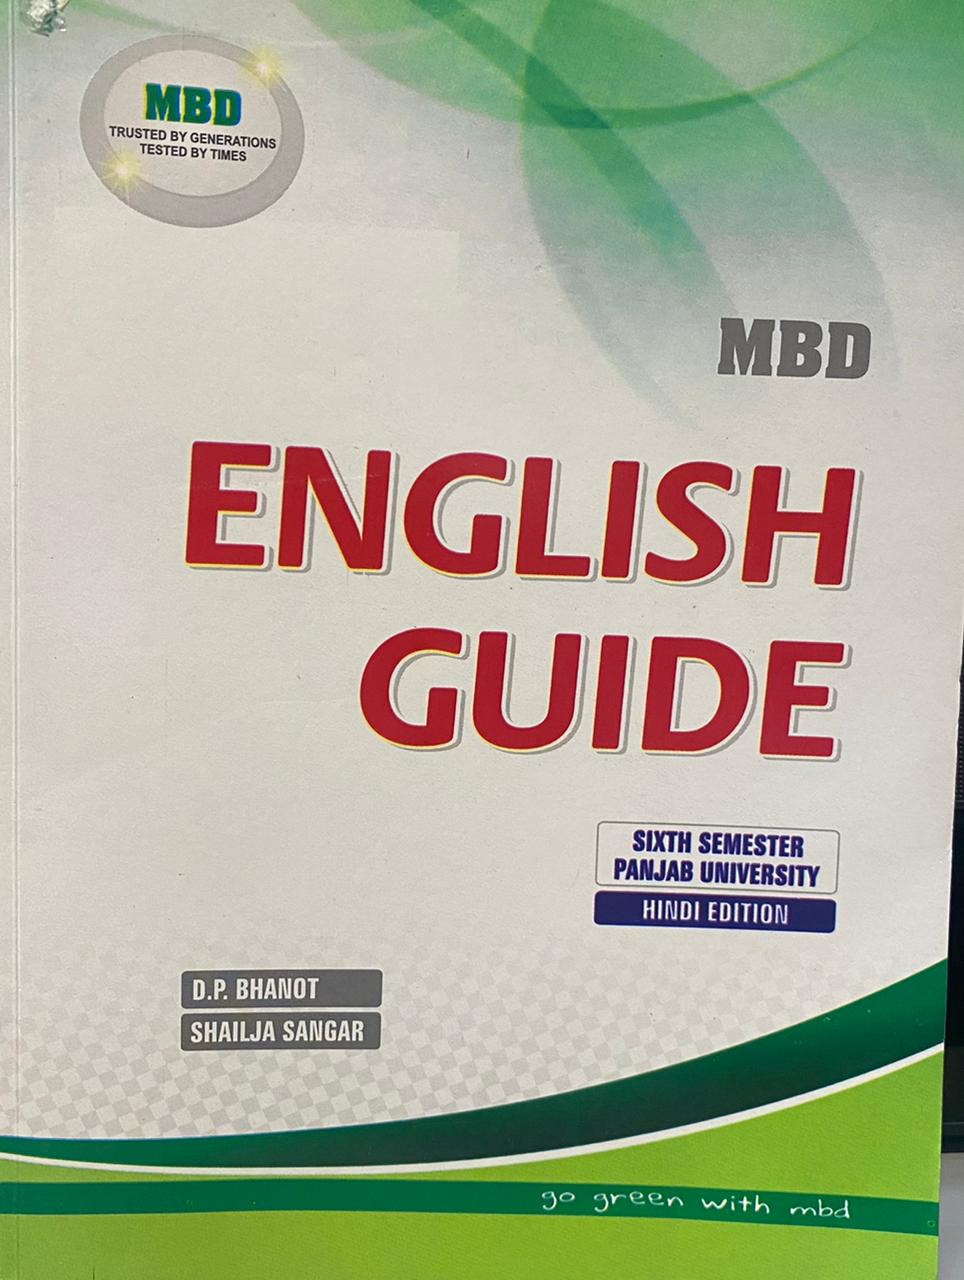 MBD English Guide in Hindi Edition for B.A. 6th Sem by D.P. Bhanot (P.U.)